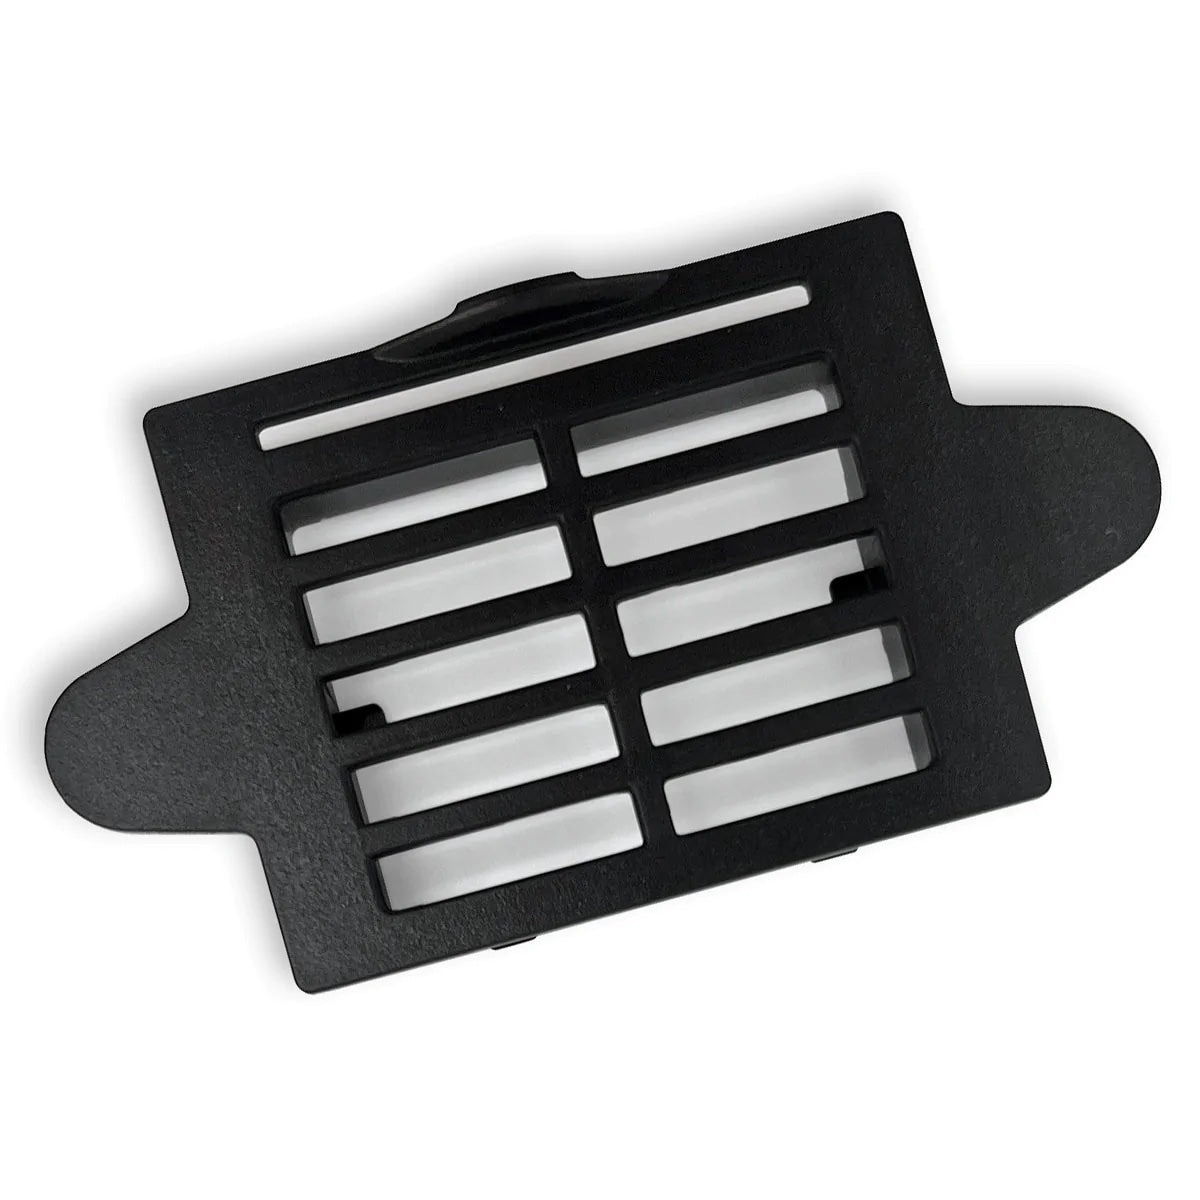 The Luna G3 Filter Cover securely holds the filter for all CPAP &amp; BiPAP machines. It's a must-have accessory that should be used with a filter during machine operation. Compatible with all Luna G3 CPAP & BiPAP machines.